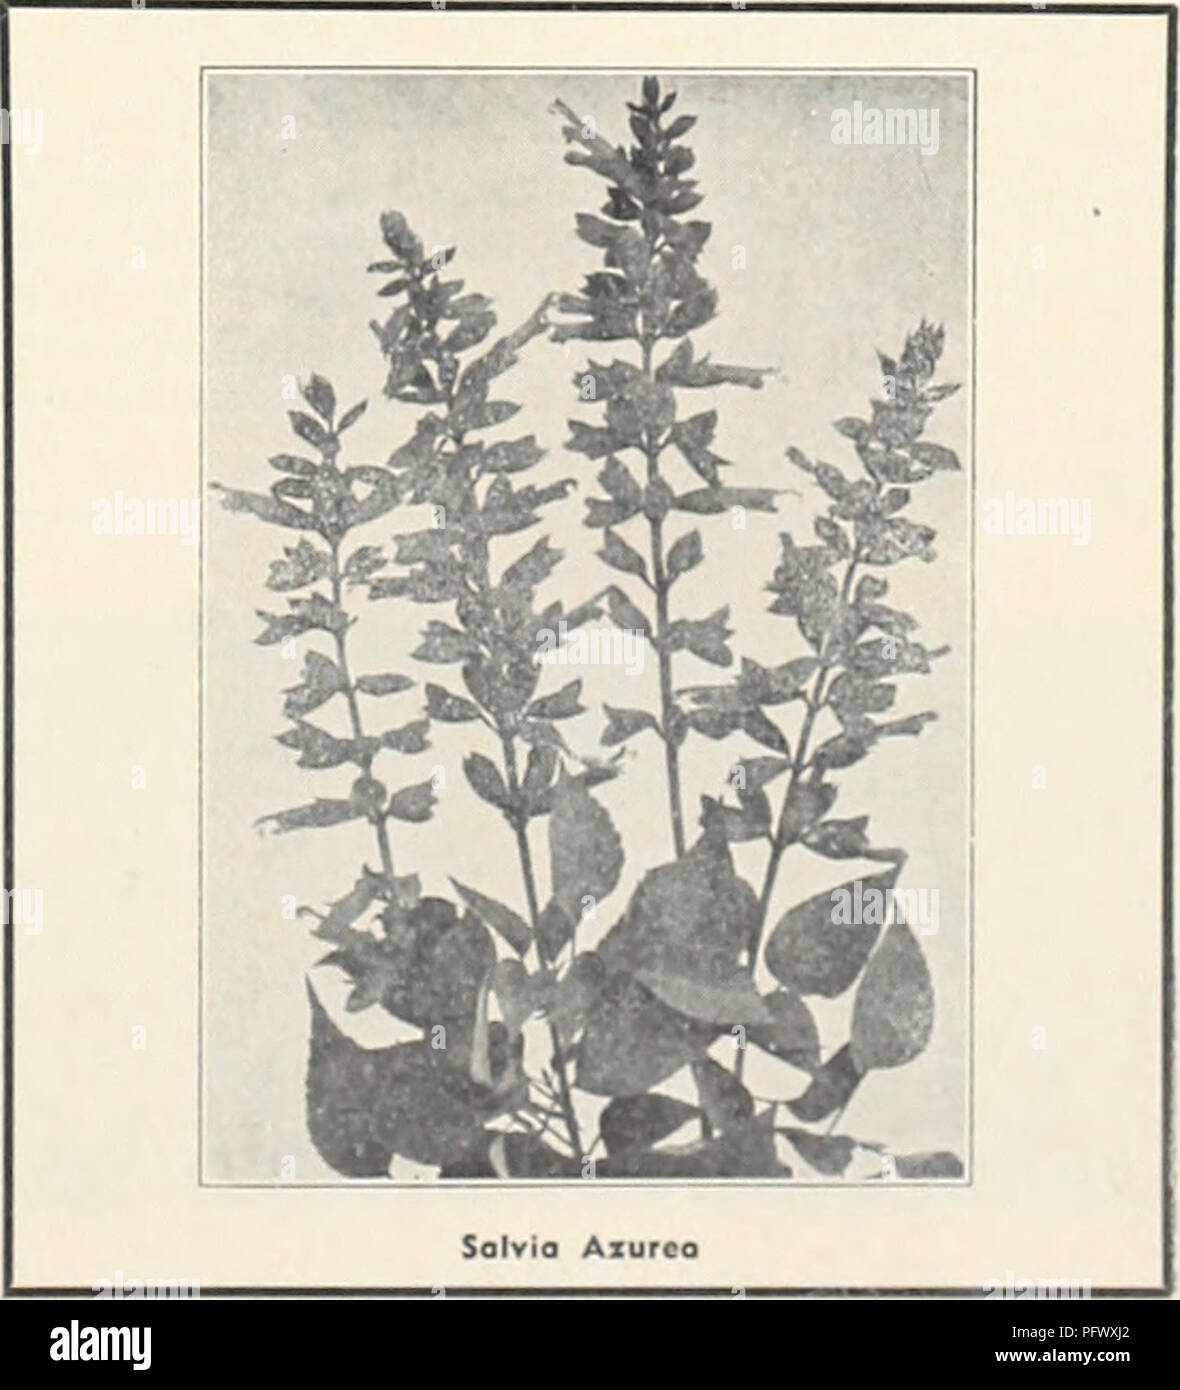 . Currie's garden annual. Flowers Seeds Catalogs; Bulbs (Plants) Seeds Catalogs; Vegetables Seeds Catalogs; Nurseries (Horticulture) Catalogs; Plants, Ornamental Catalogs; Gardening Equipment and supplies Catalogs. SILENE (Cotchfly) PENDULA COMPACTA — Dwarf, hardy perennial, pretty pink flowers; 6&quot;. Pkt., 10c. SCHAFTA (Autumn Catchtlyl — Masses of bright pink flowers from July to October. Plants, 25c; seeds, Pkt., 15e. ALPESTRIS—Dwarf rock plant, 4&quot; high, pure white flowers in May and June. Plants, 25c; doz., S2.50. STATICE &lt; Sec Lavender) LATIFOLIA—Tufts of leathery leaves, large Stock Photo